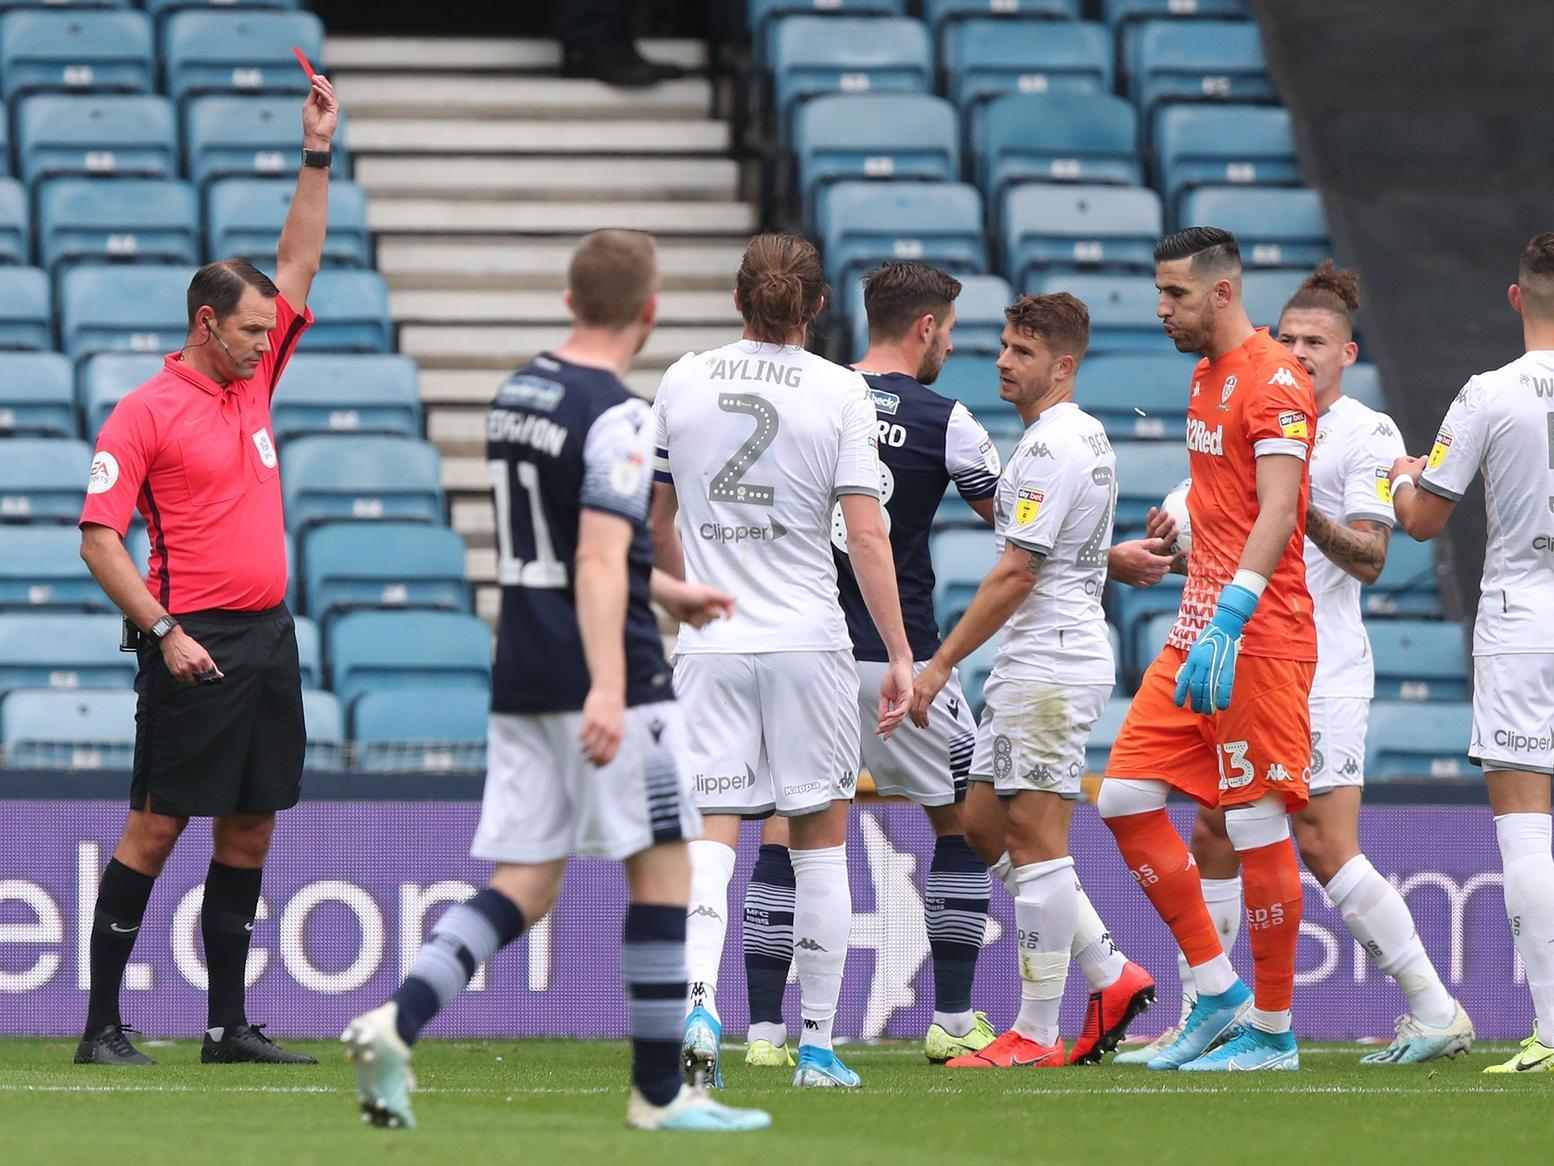 Gaetano Berardi was sent off at Millwall earlier in the season before the decision was overturned by the FA.